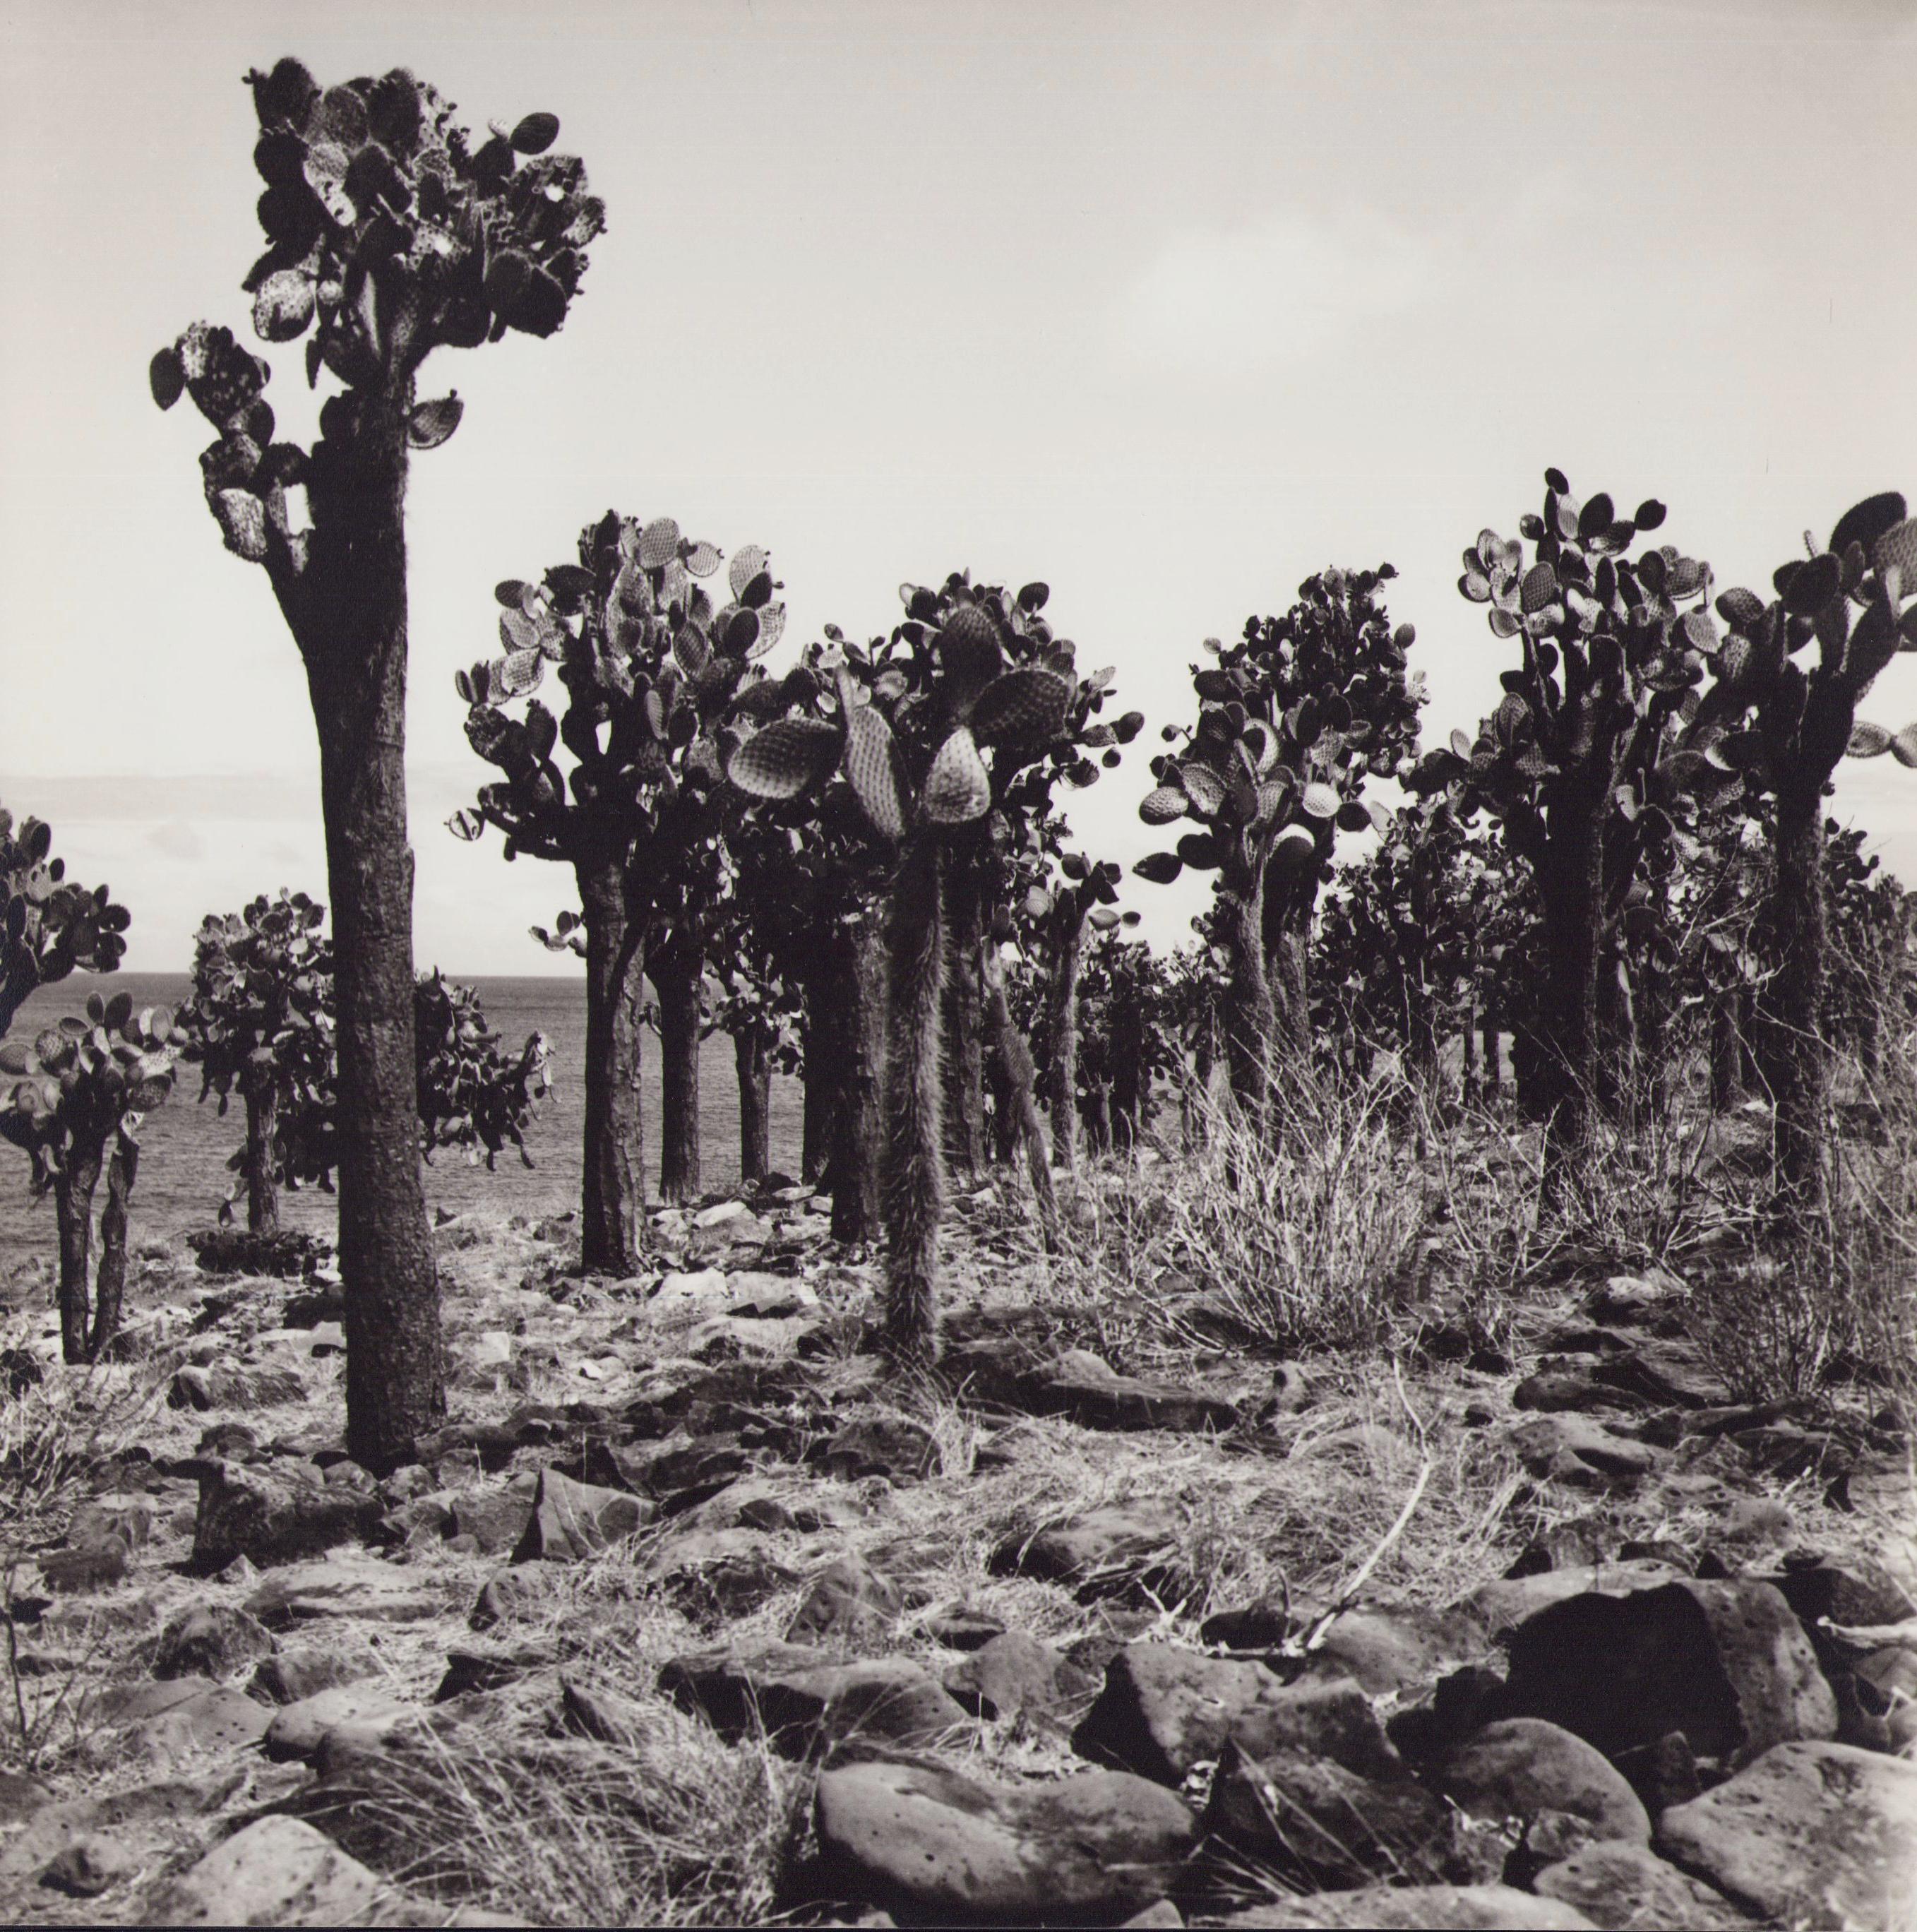 Galápagos, Cactus-Forest, Black and White Photography, 1960s, 23, 2 x 23, 2 cm